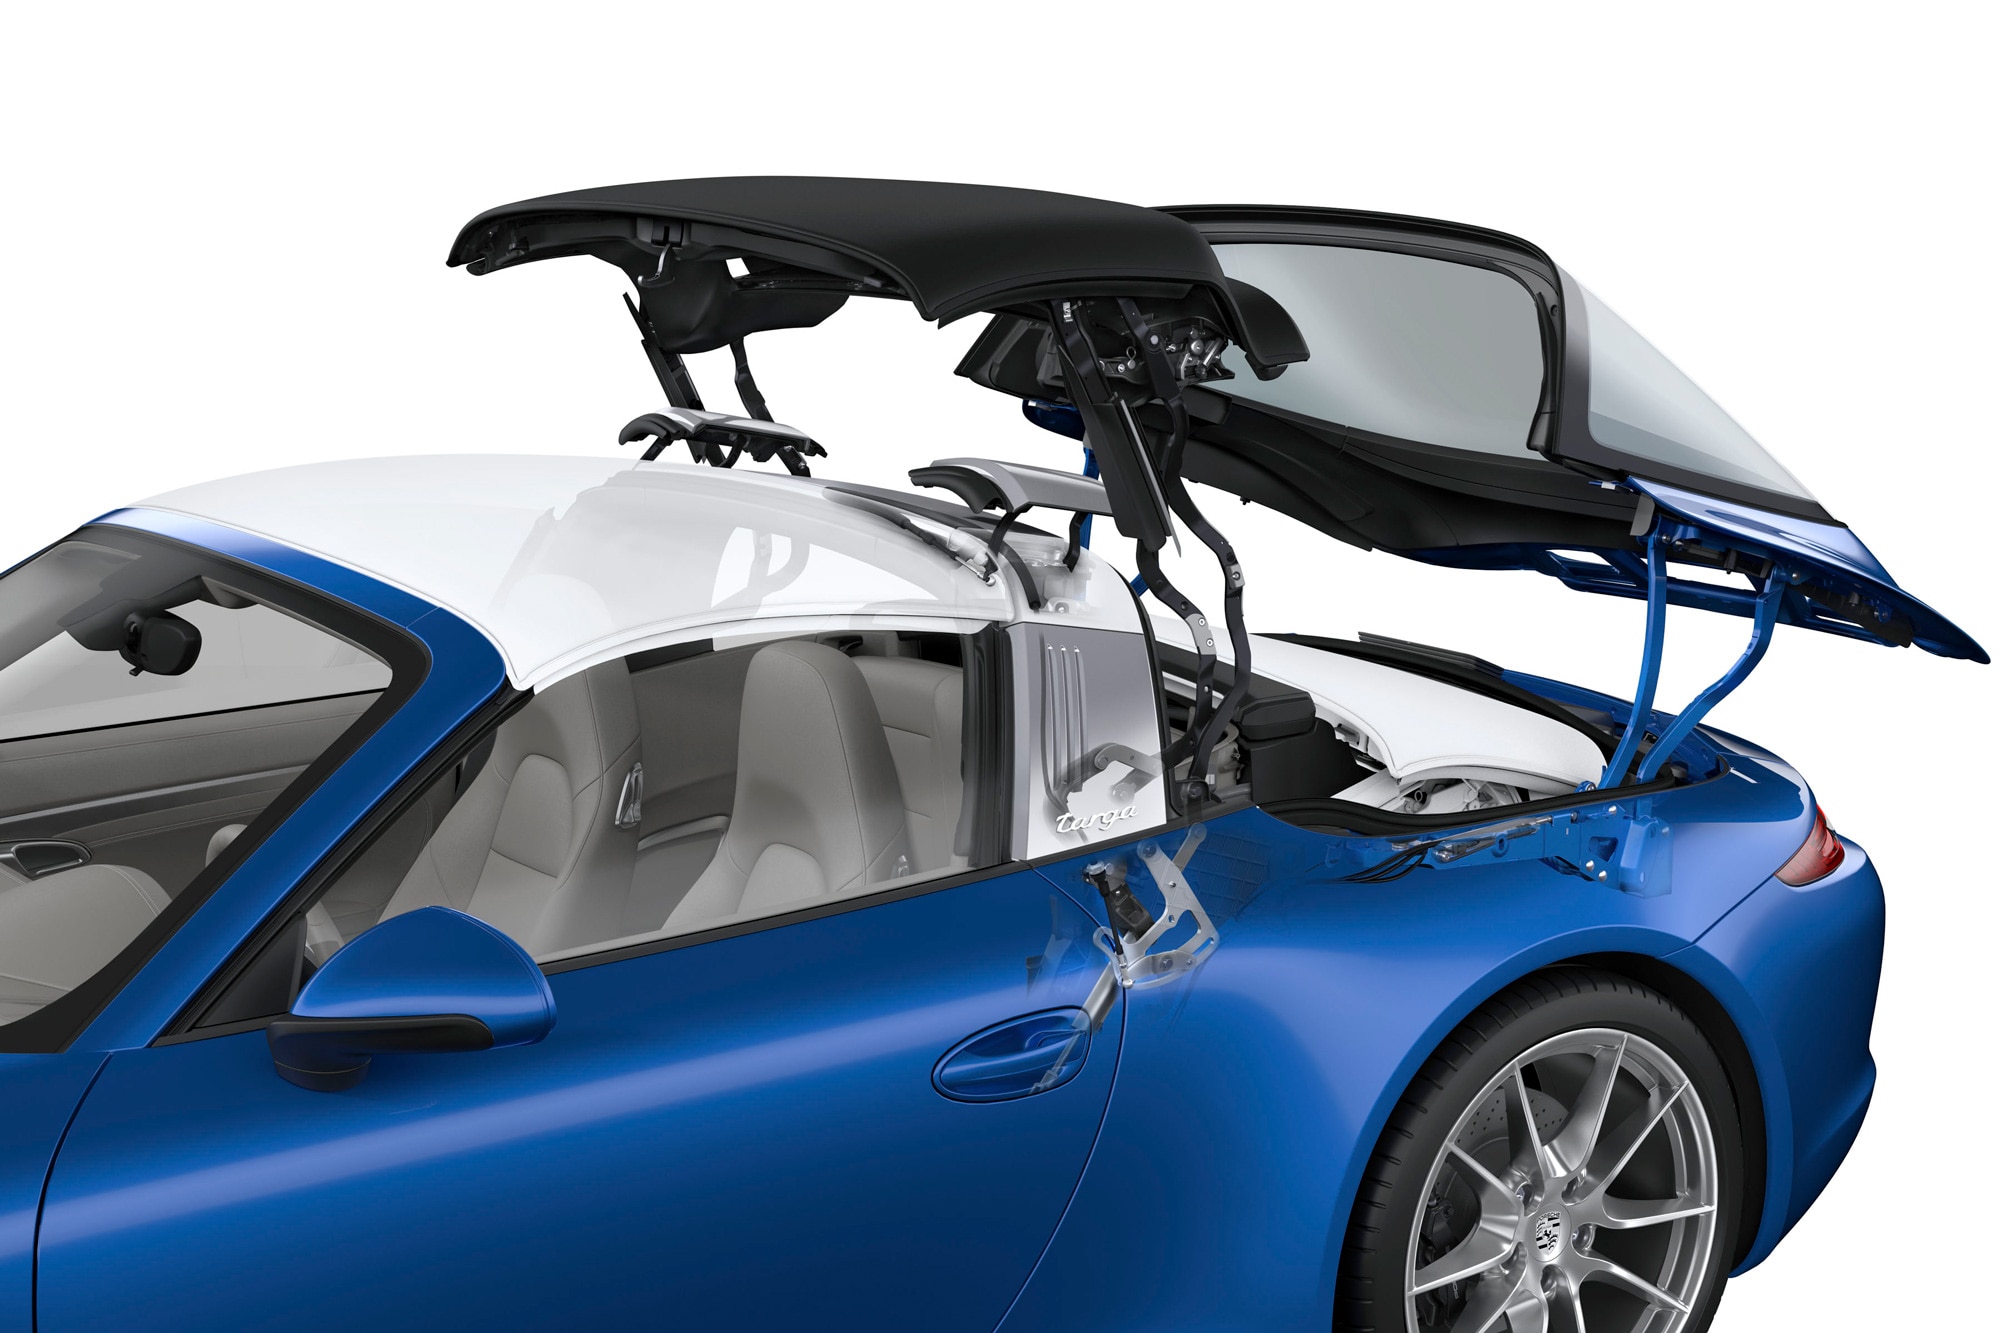 Blue 2014 911 Targa roof system with moving parts; soft top and rear glass window